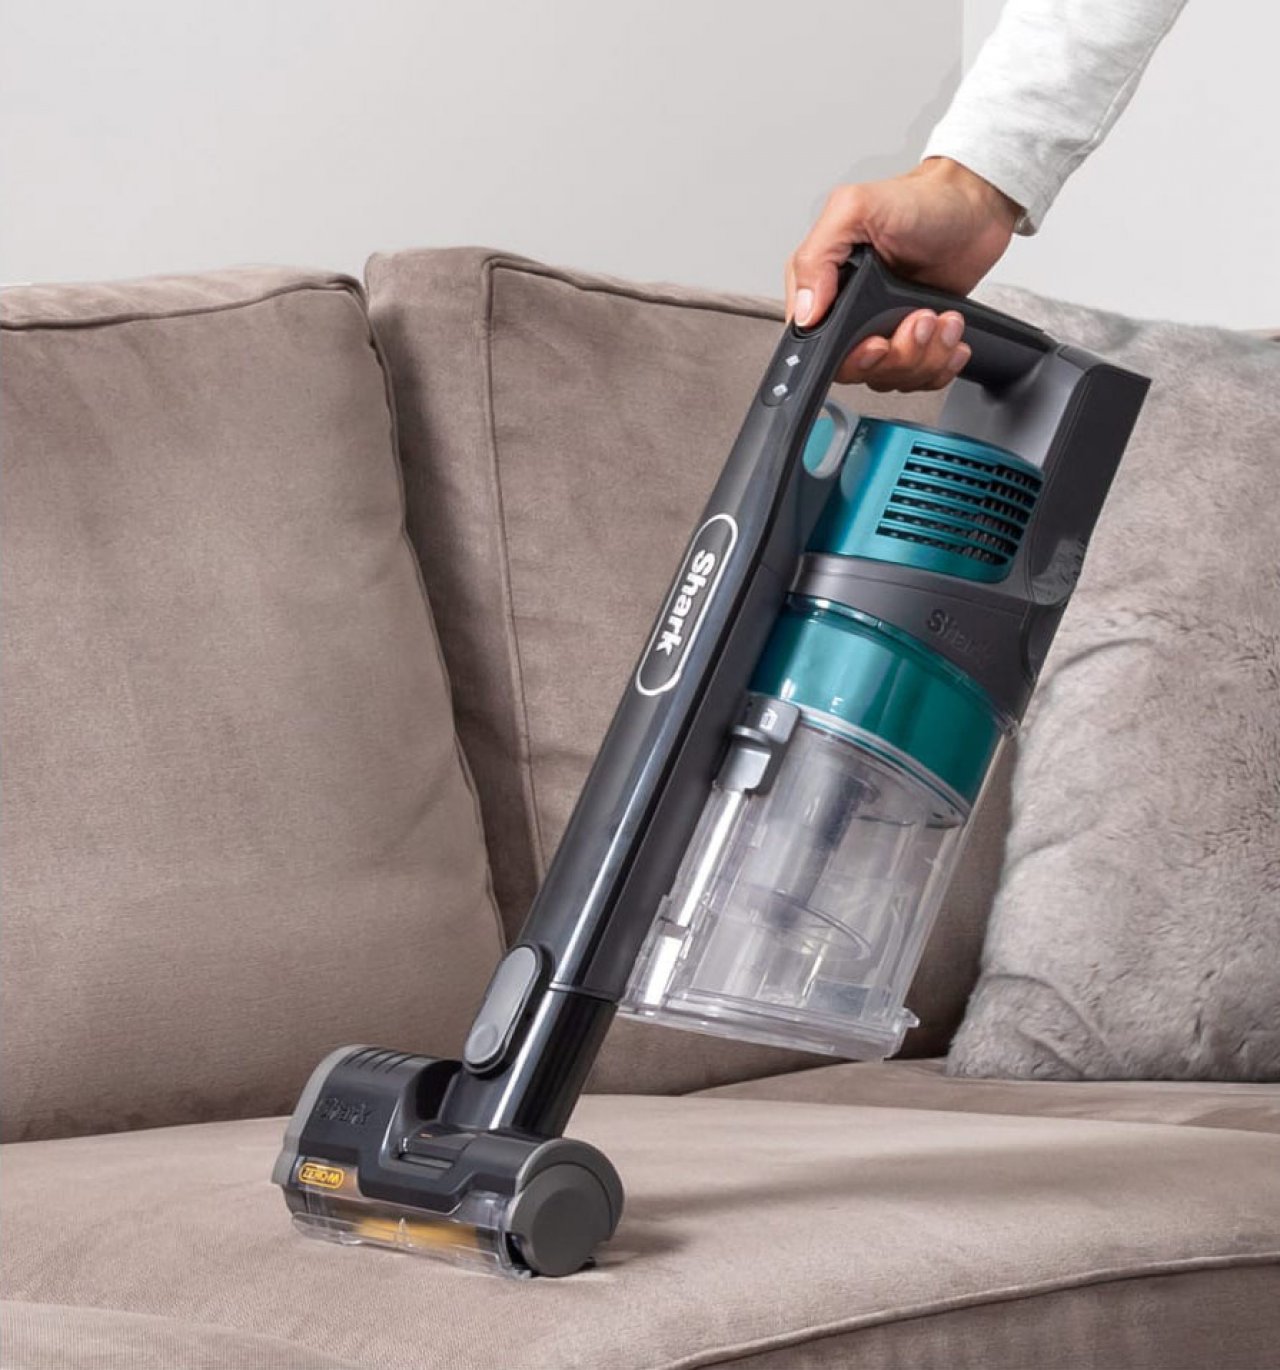 The optional motorised pet tool makes cleaning sofas easy